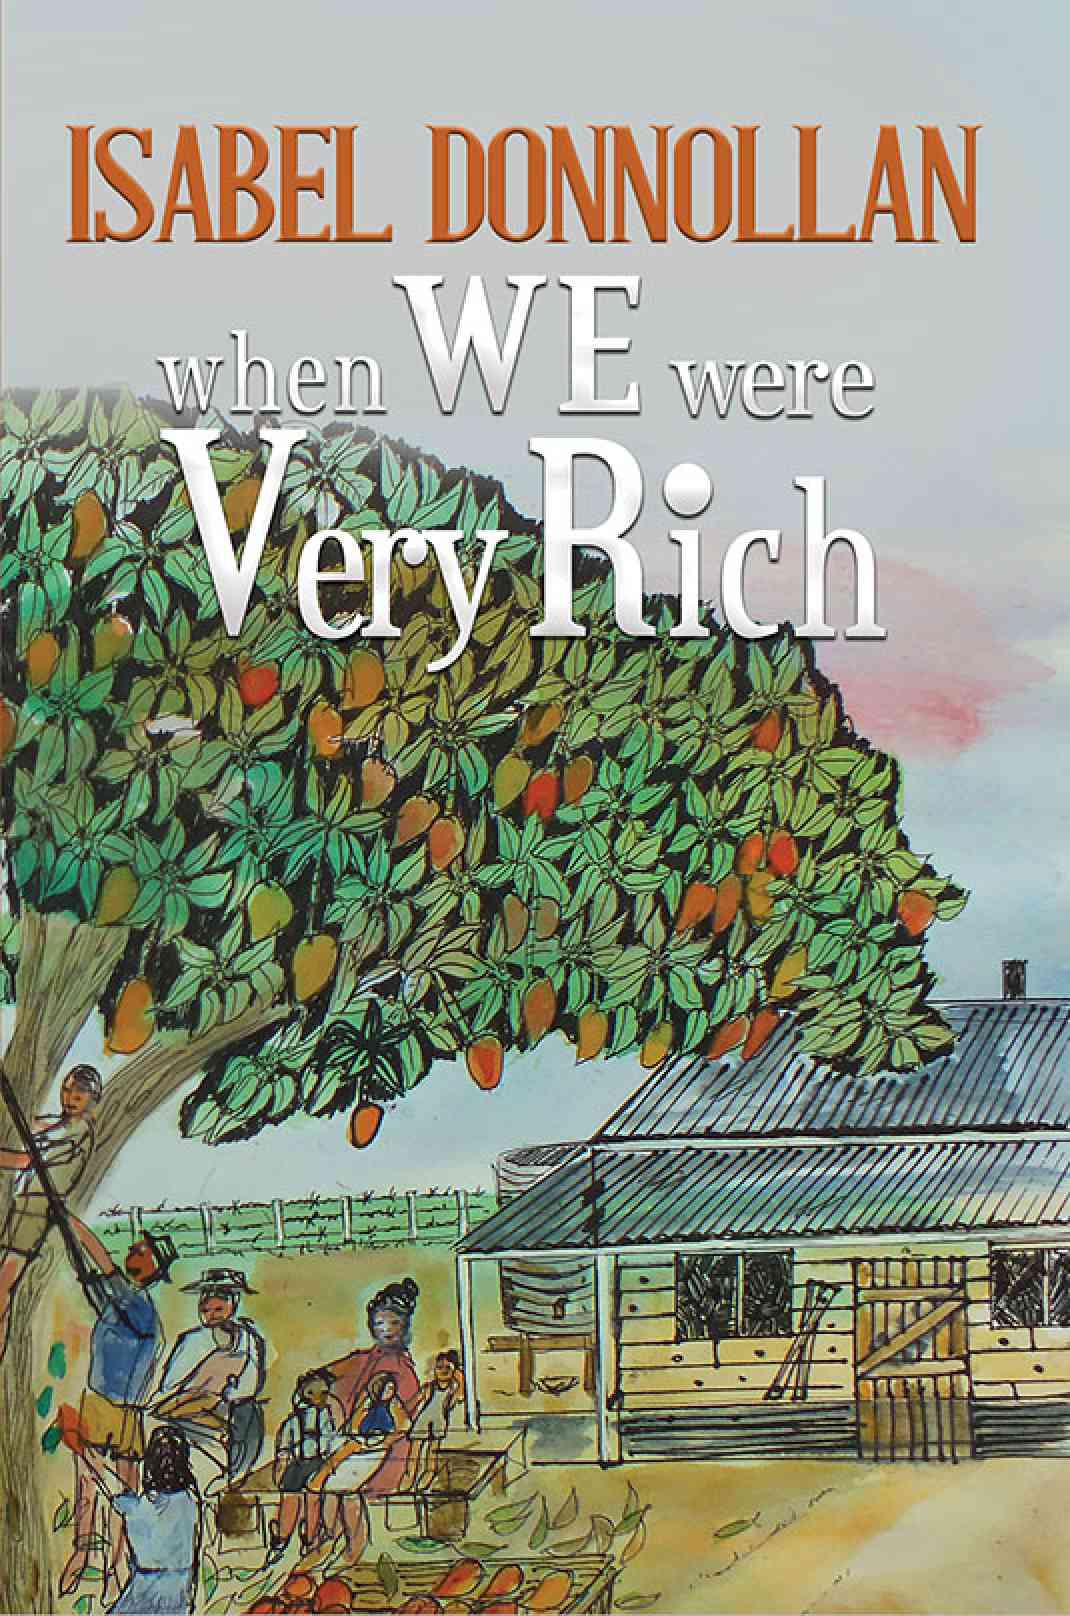 Author Success: When We Were Very Rich by Isabel Donnollan